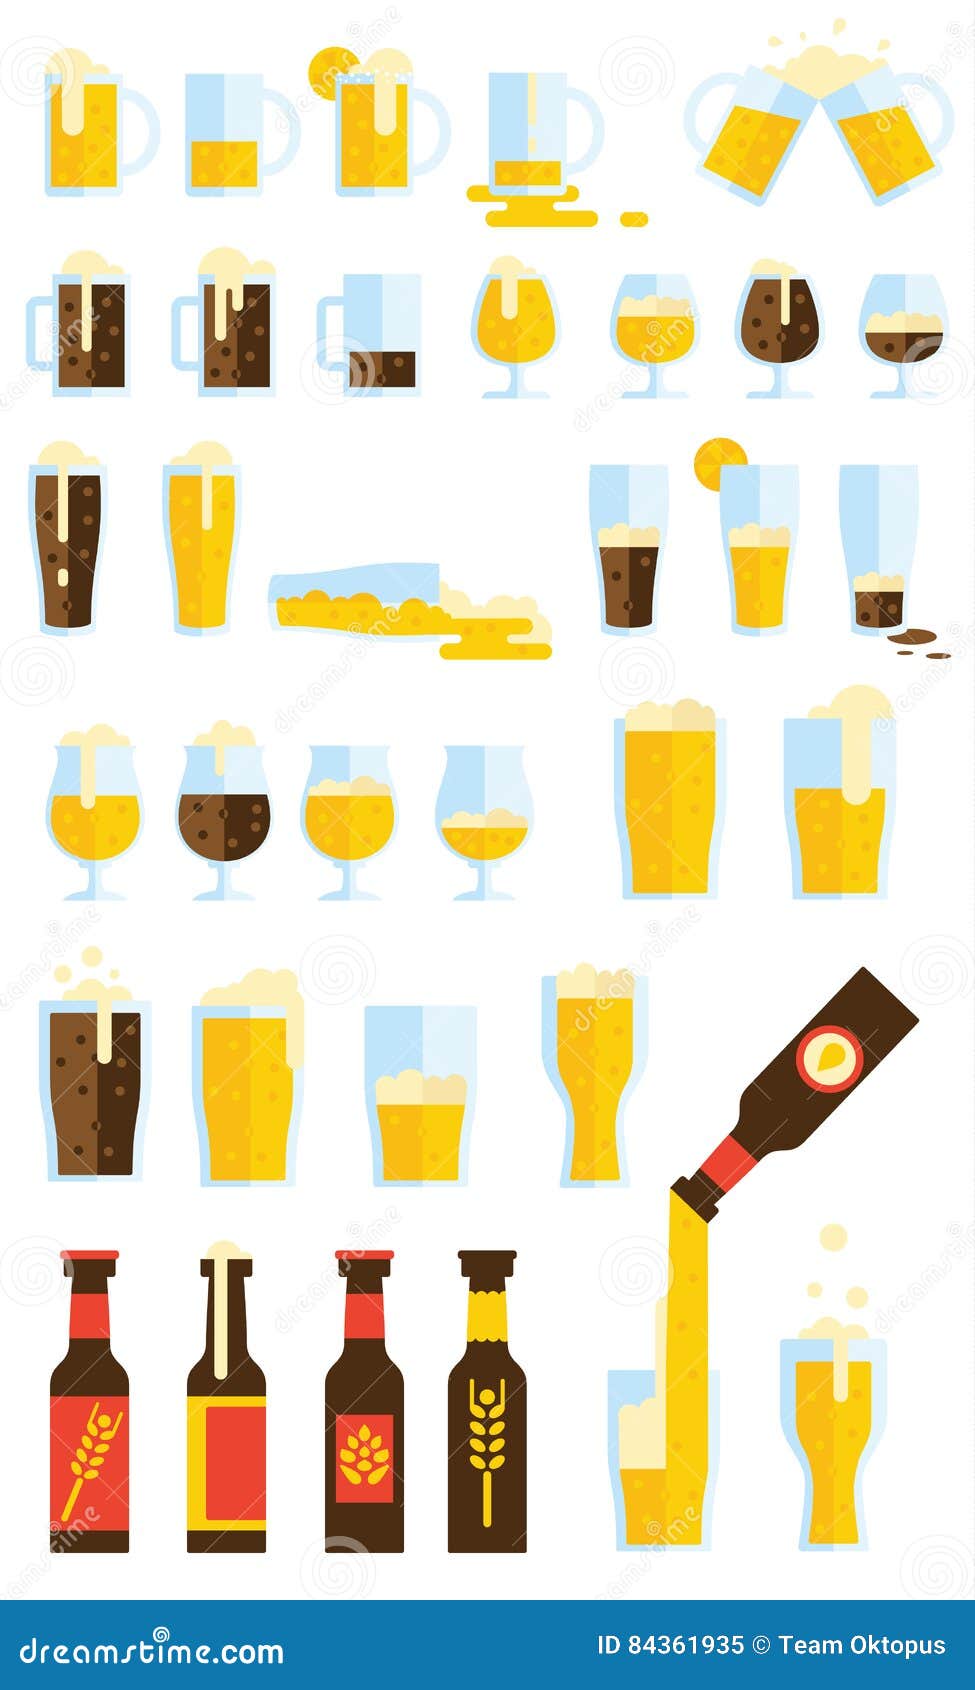 Beer Set. A set of 34 beer-related icons